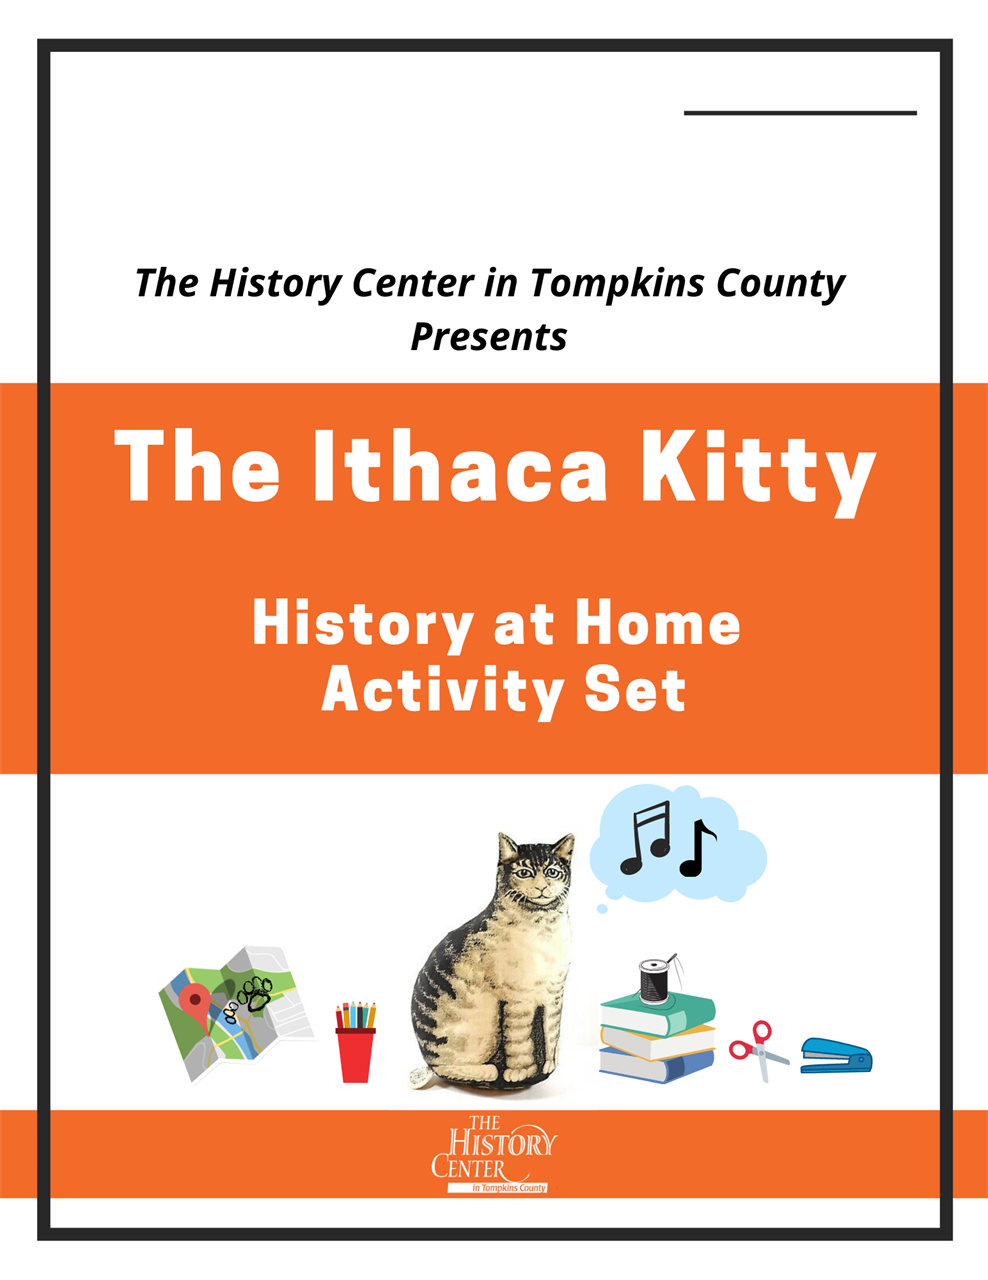 An image of the Ithaca Kitty "History at Home Activity Set"